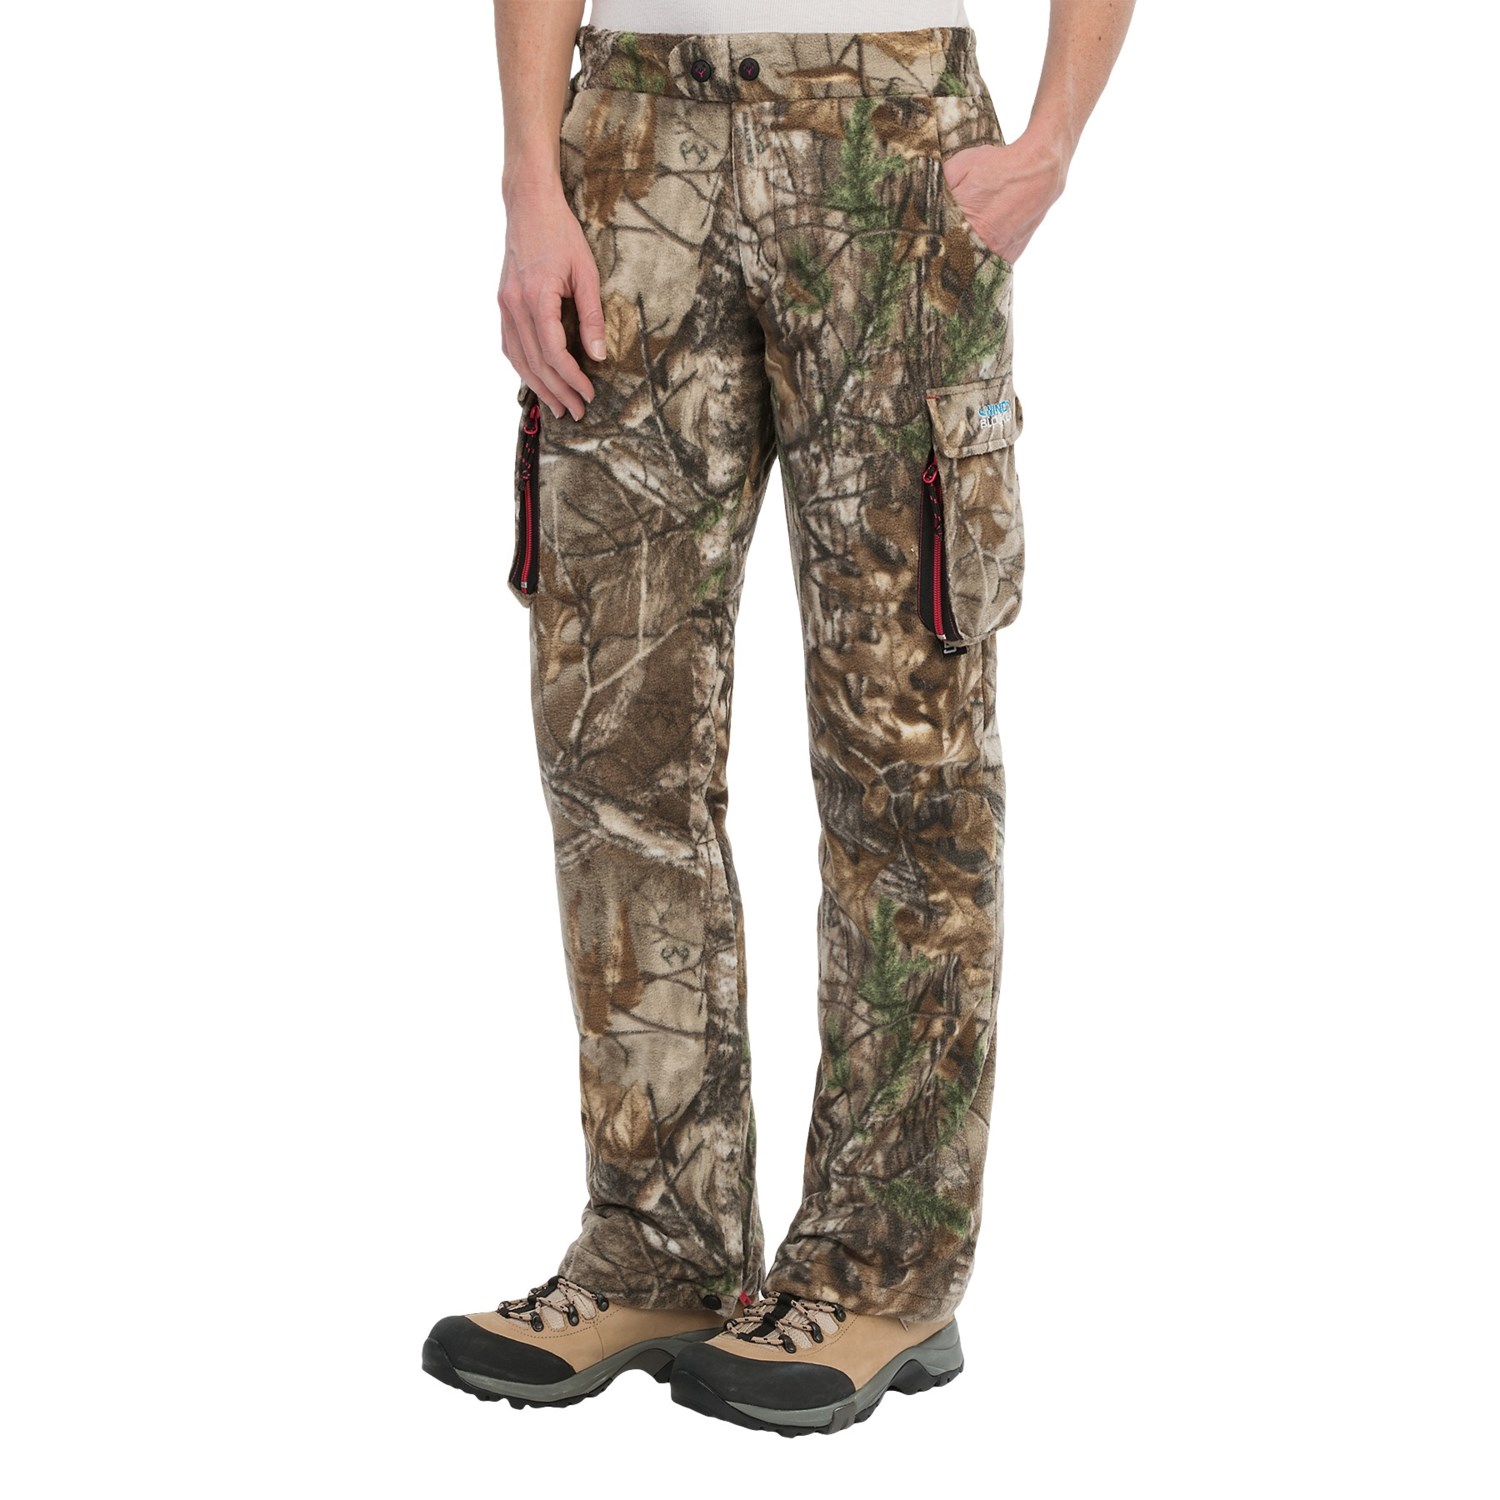 ScentBlocker Sola Windtec Hunting Pants - Insulated (For Women) - Save 35%